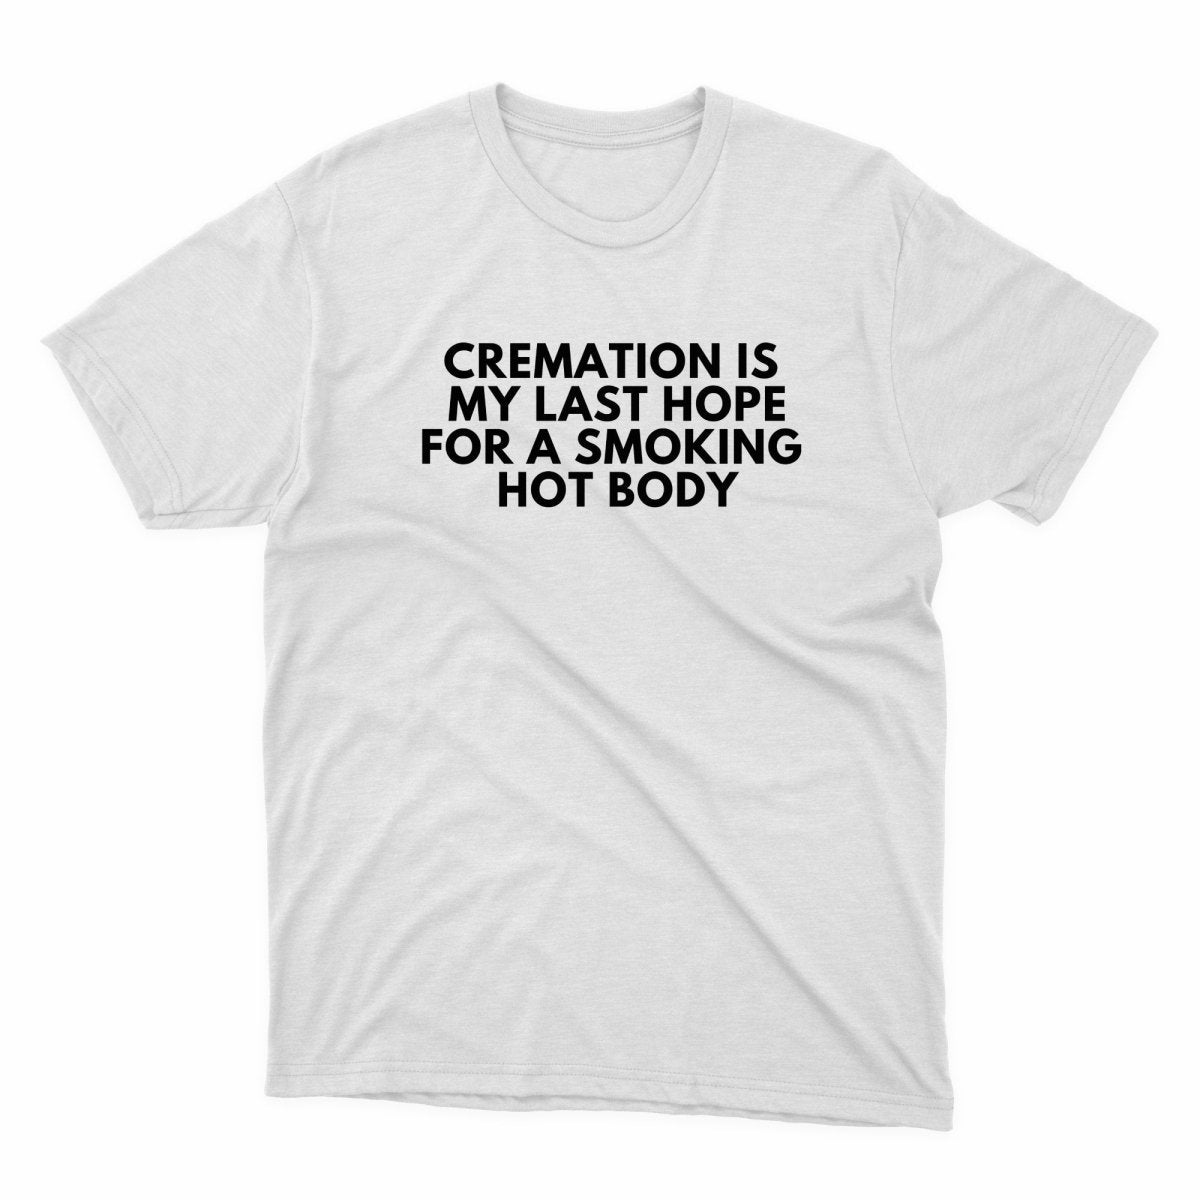 Cremation Is My Last For A Smoking Hot Body Hope Shirt - stickerbullCremation Is My Last For A Smoking Hot Body Hope ShirtShirtsPrintifystickerbull71010356804206837580WhiteSa white t - shirt with the words cremation is my last hope for